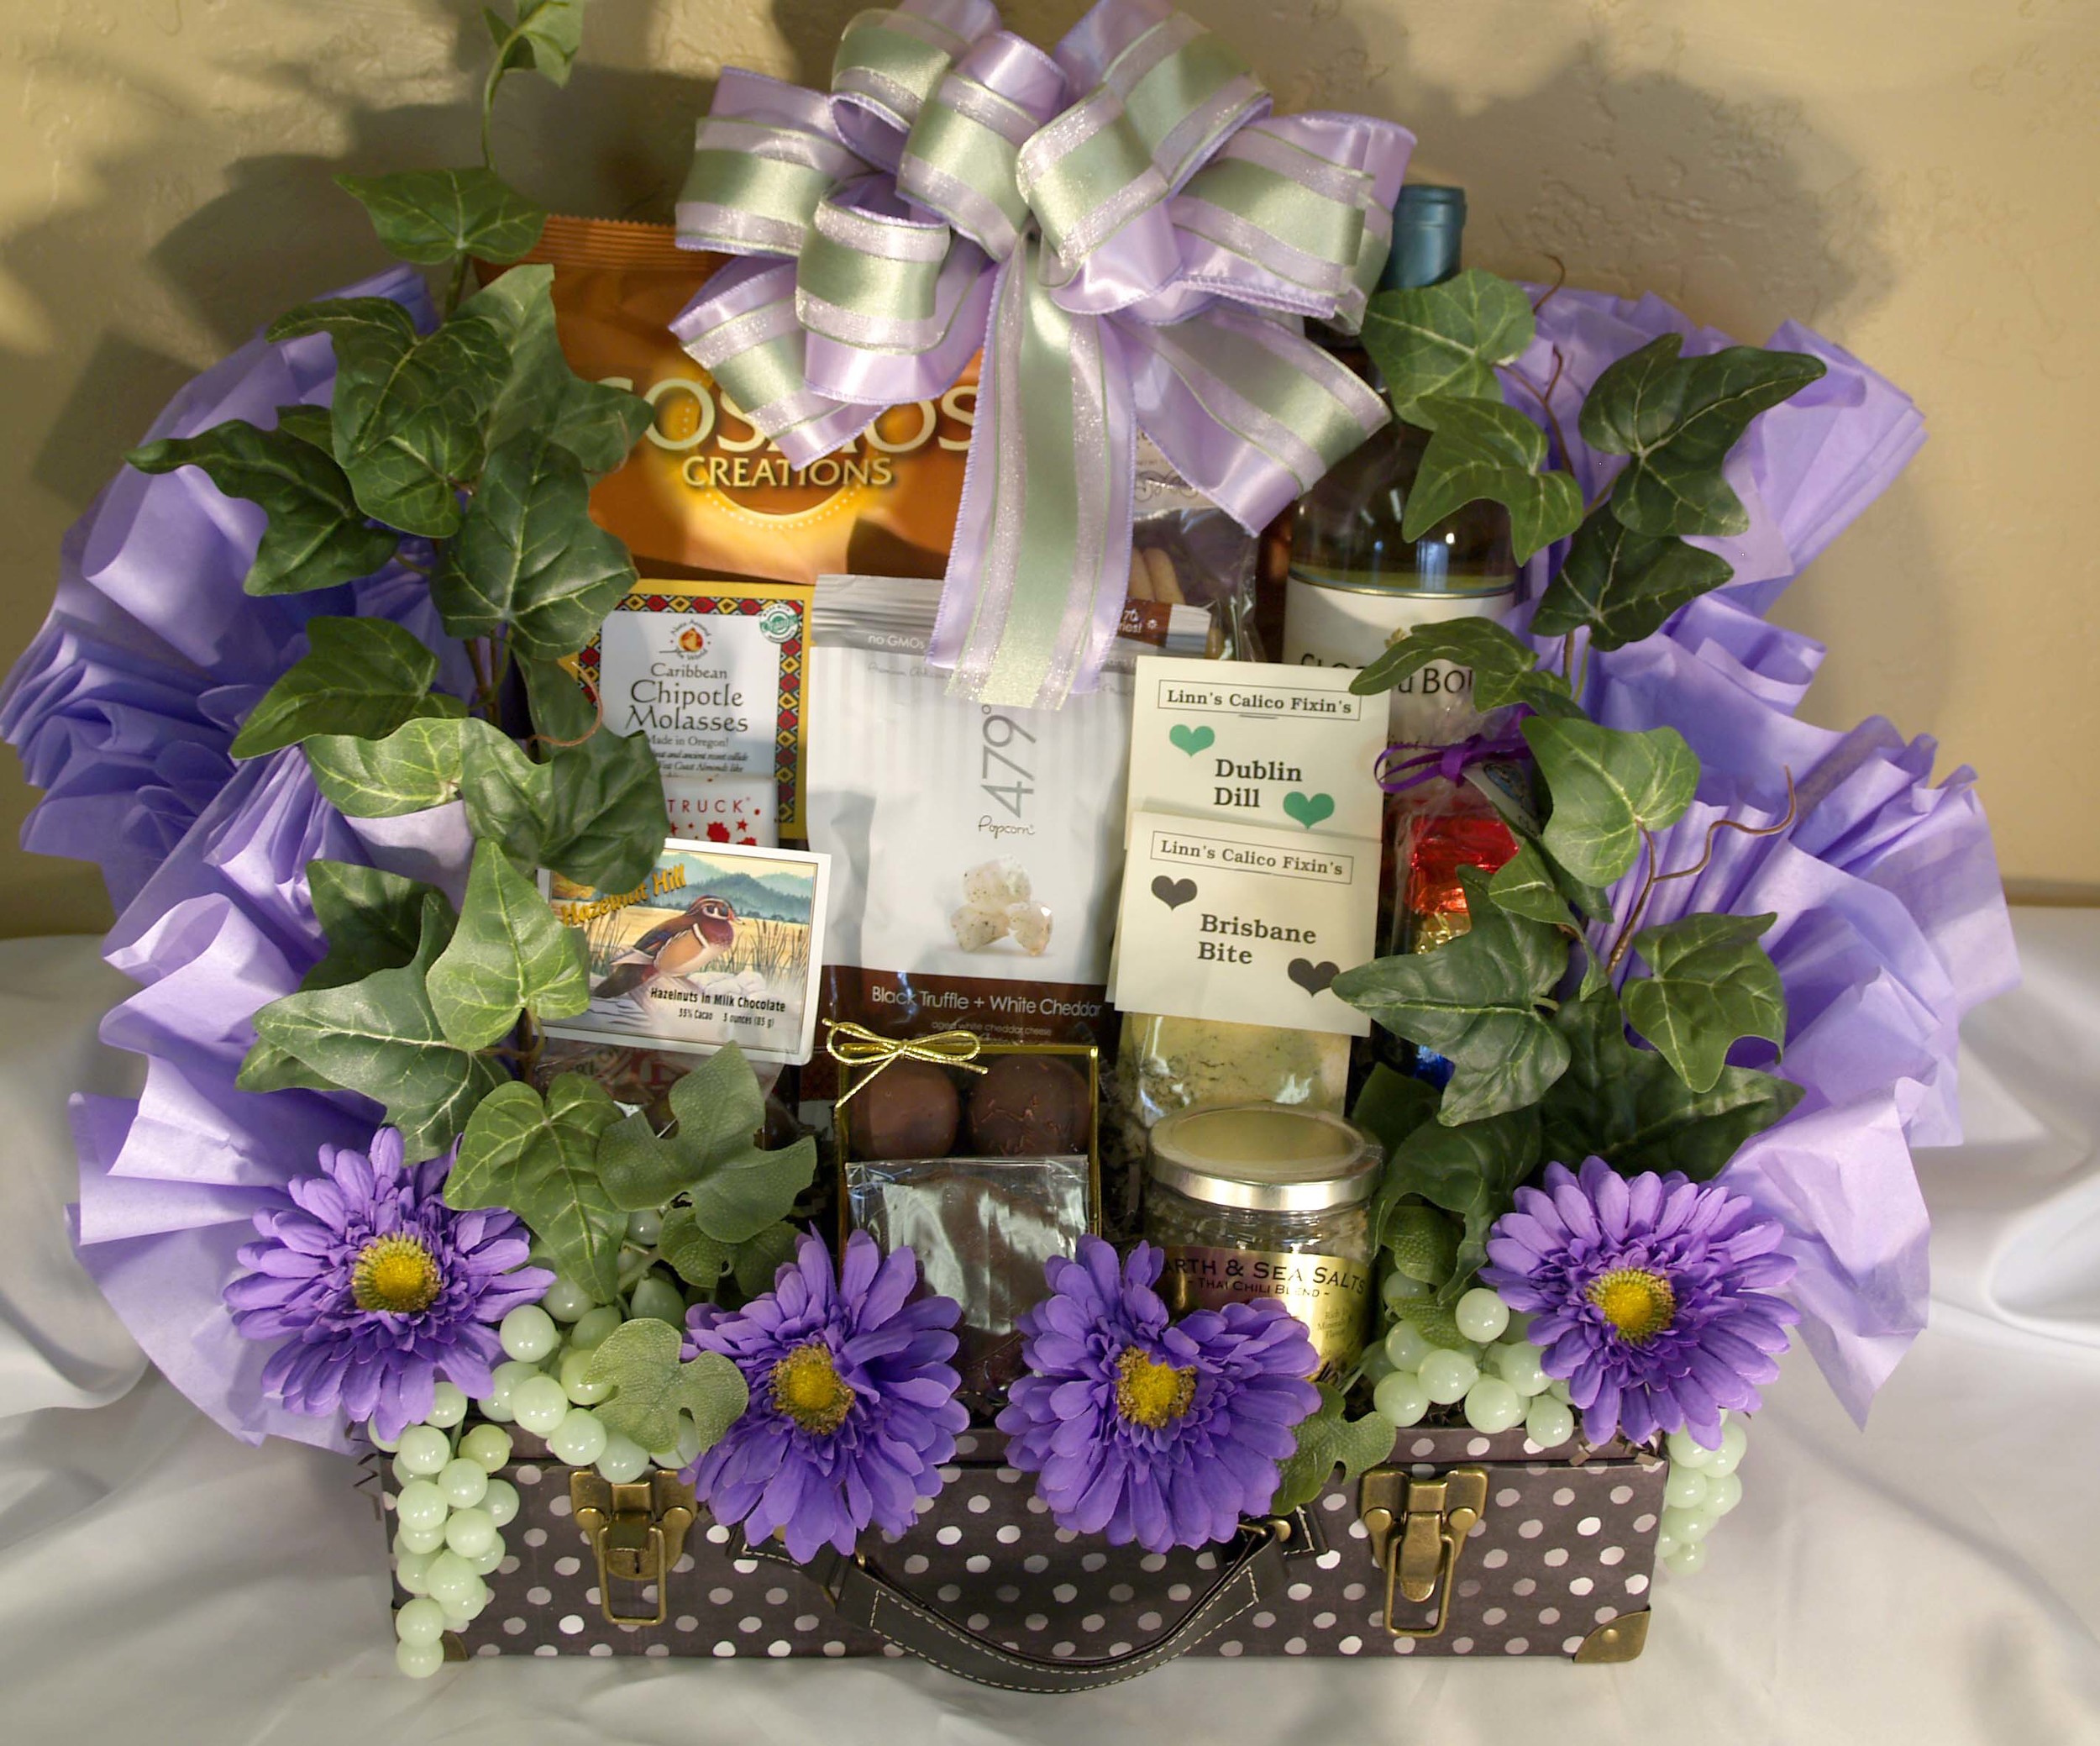 Each basket is specially designed for the special person or the special occasion.